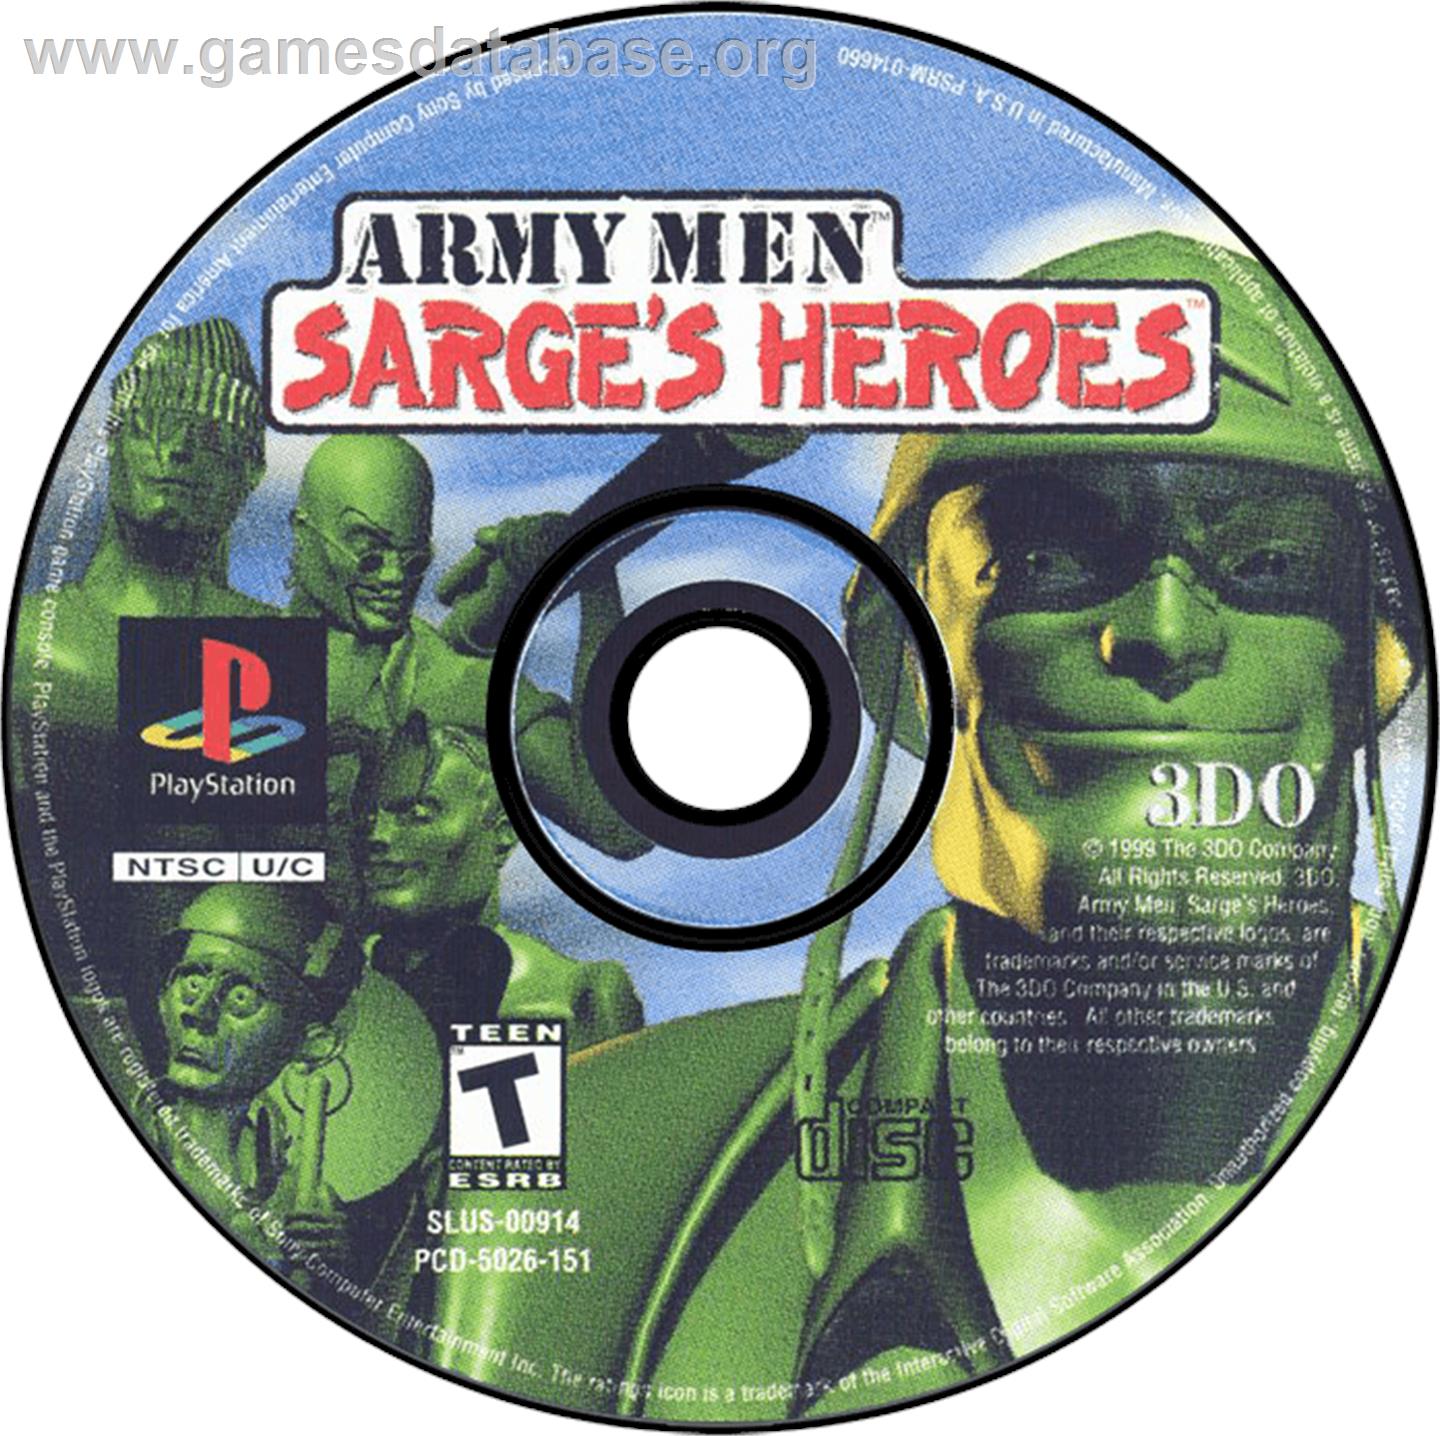 Army Men: Sarge's Heroes - Sony Playstation - Artwork - Disc